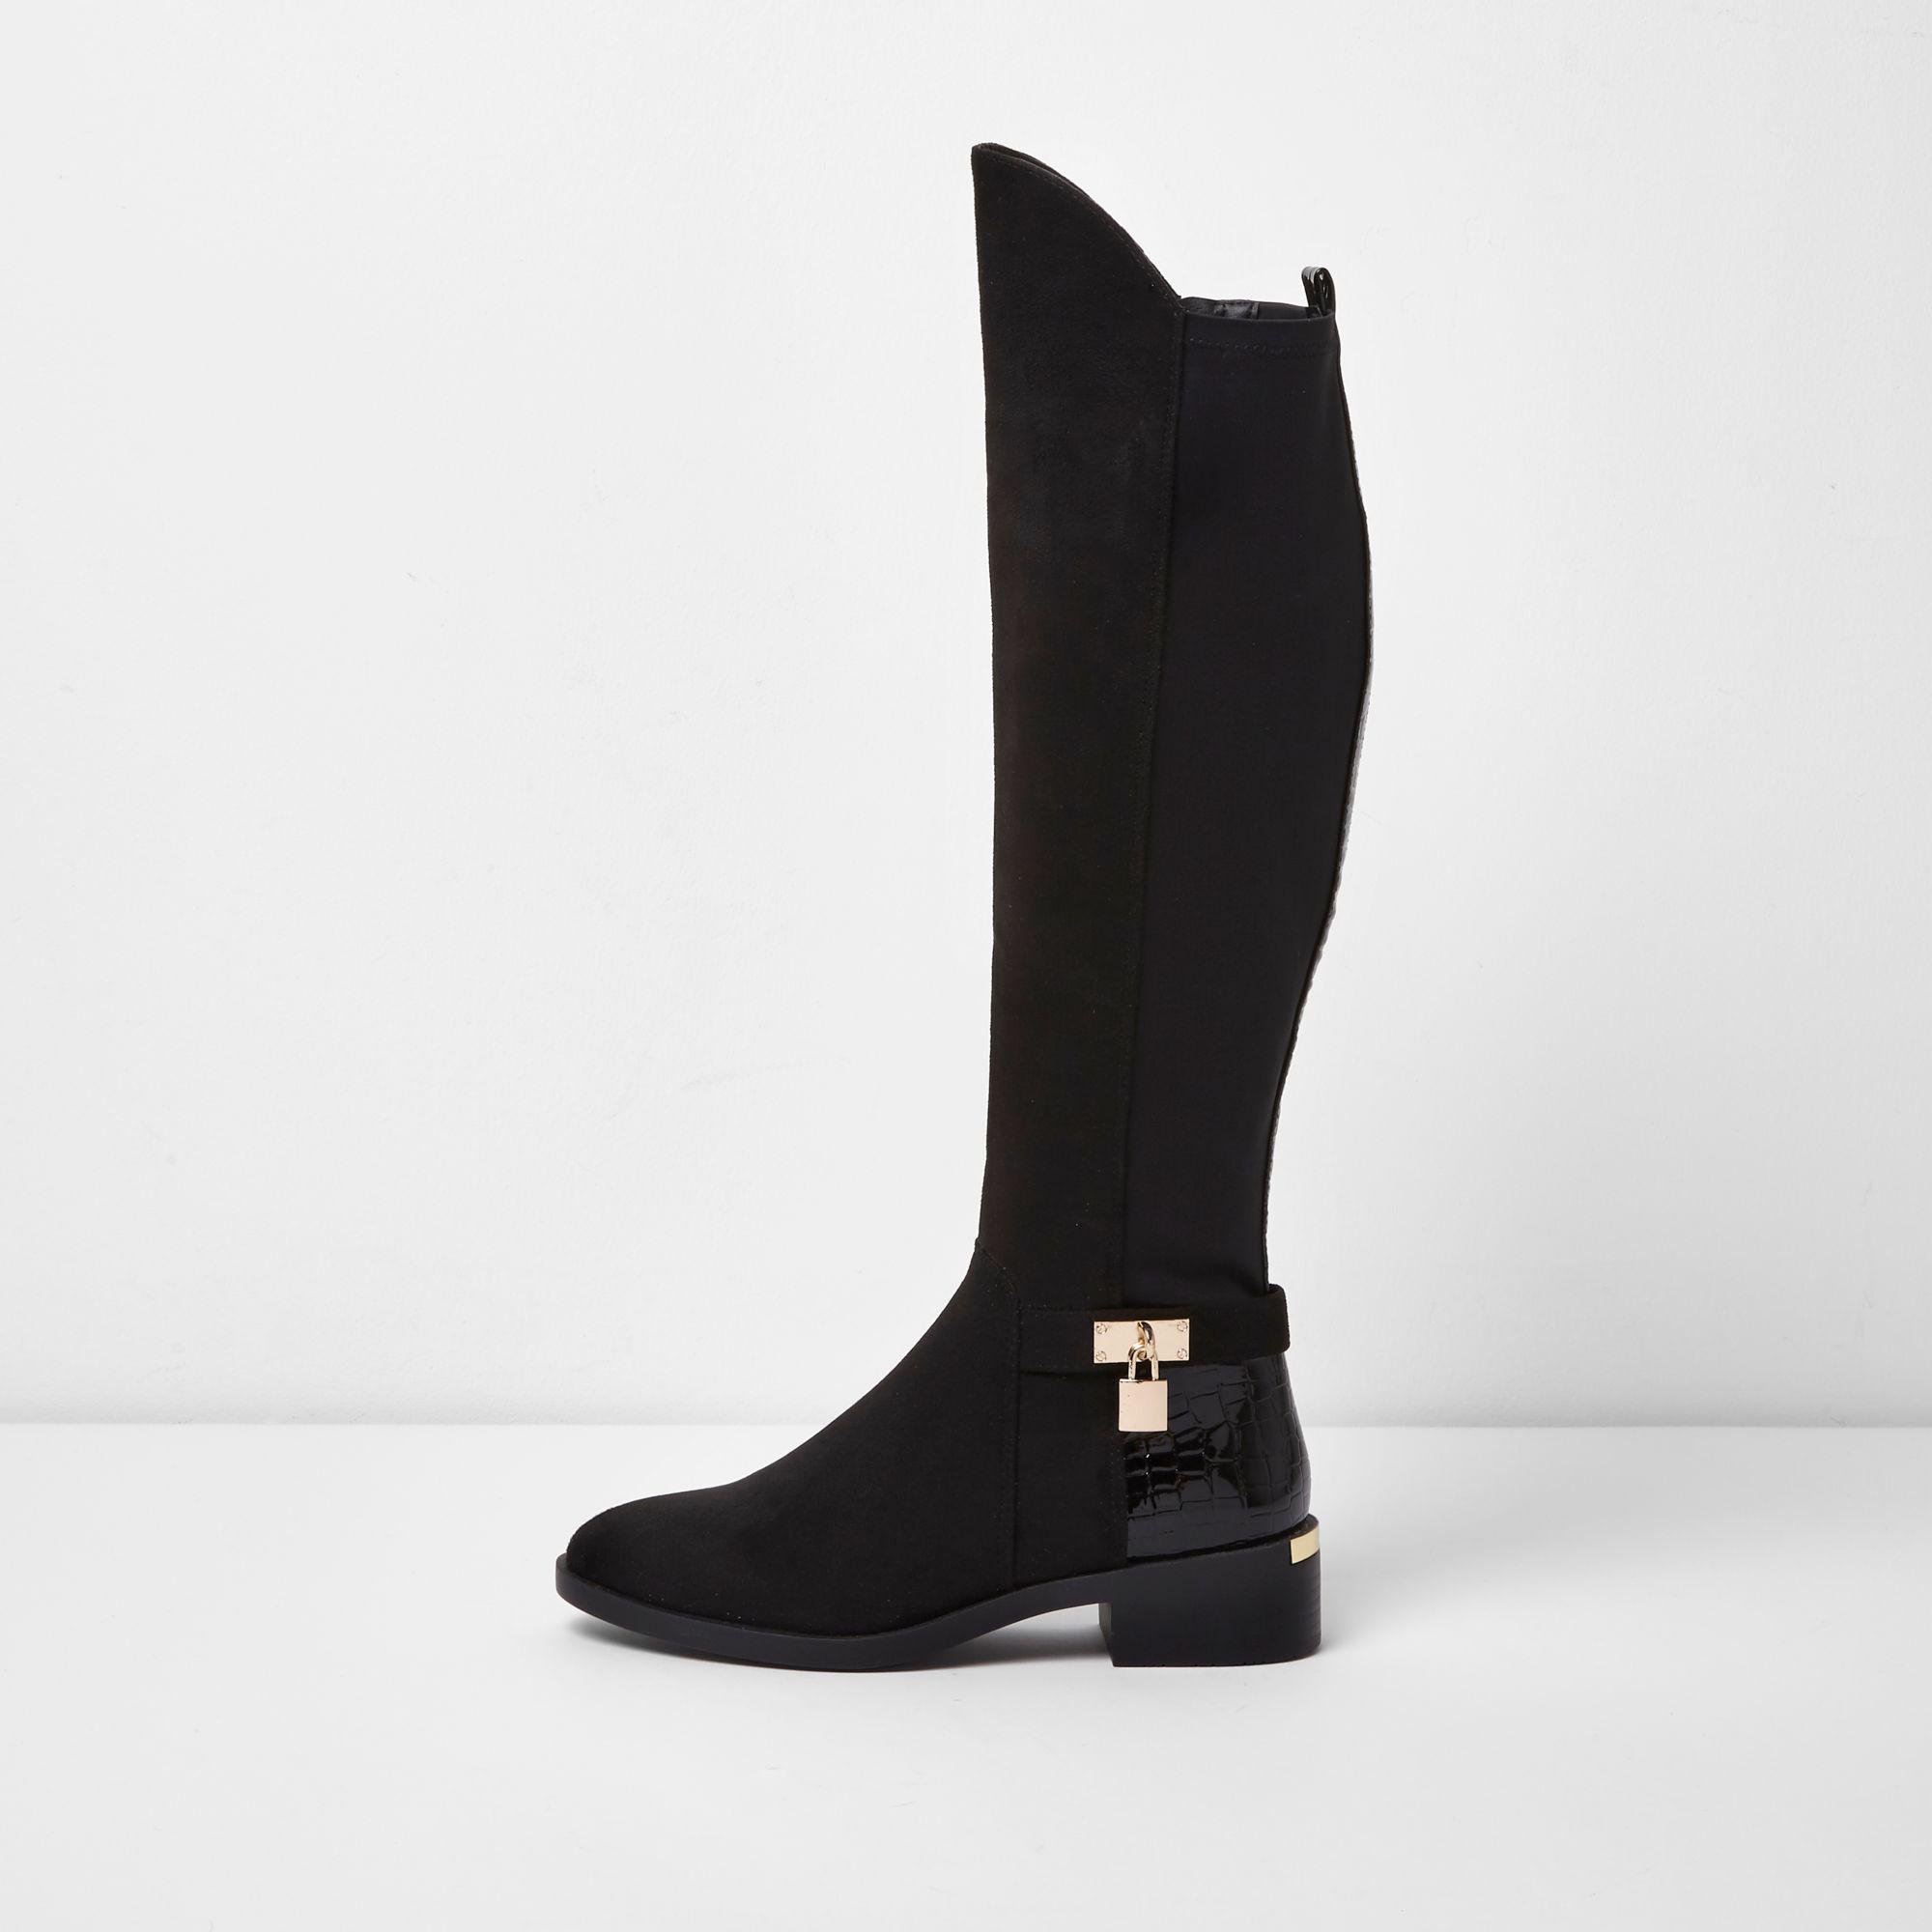 River Island Black Knee High Riding Boots - Lyst